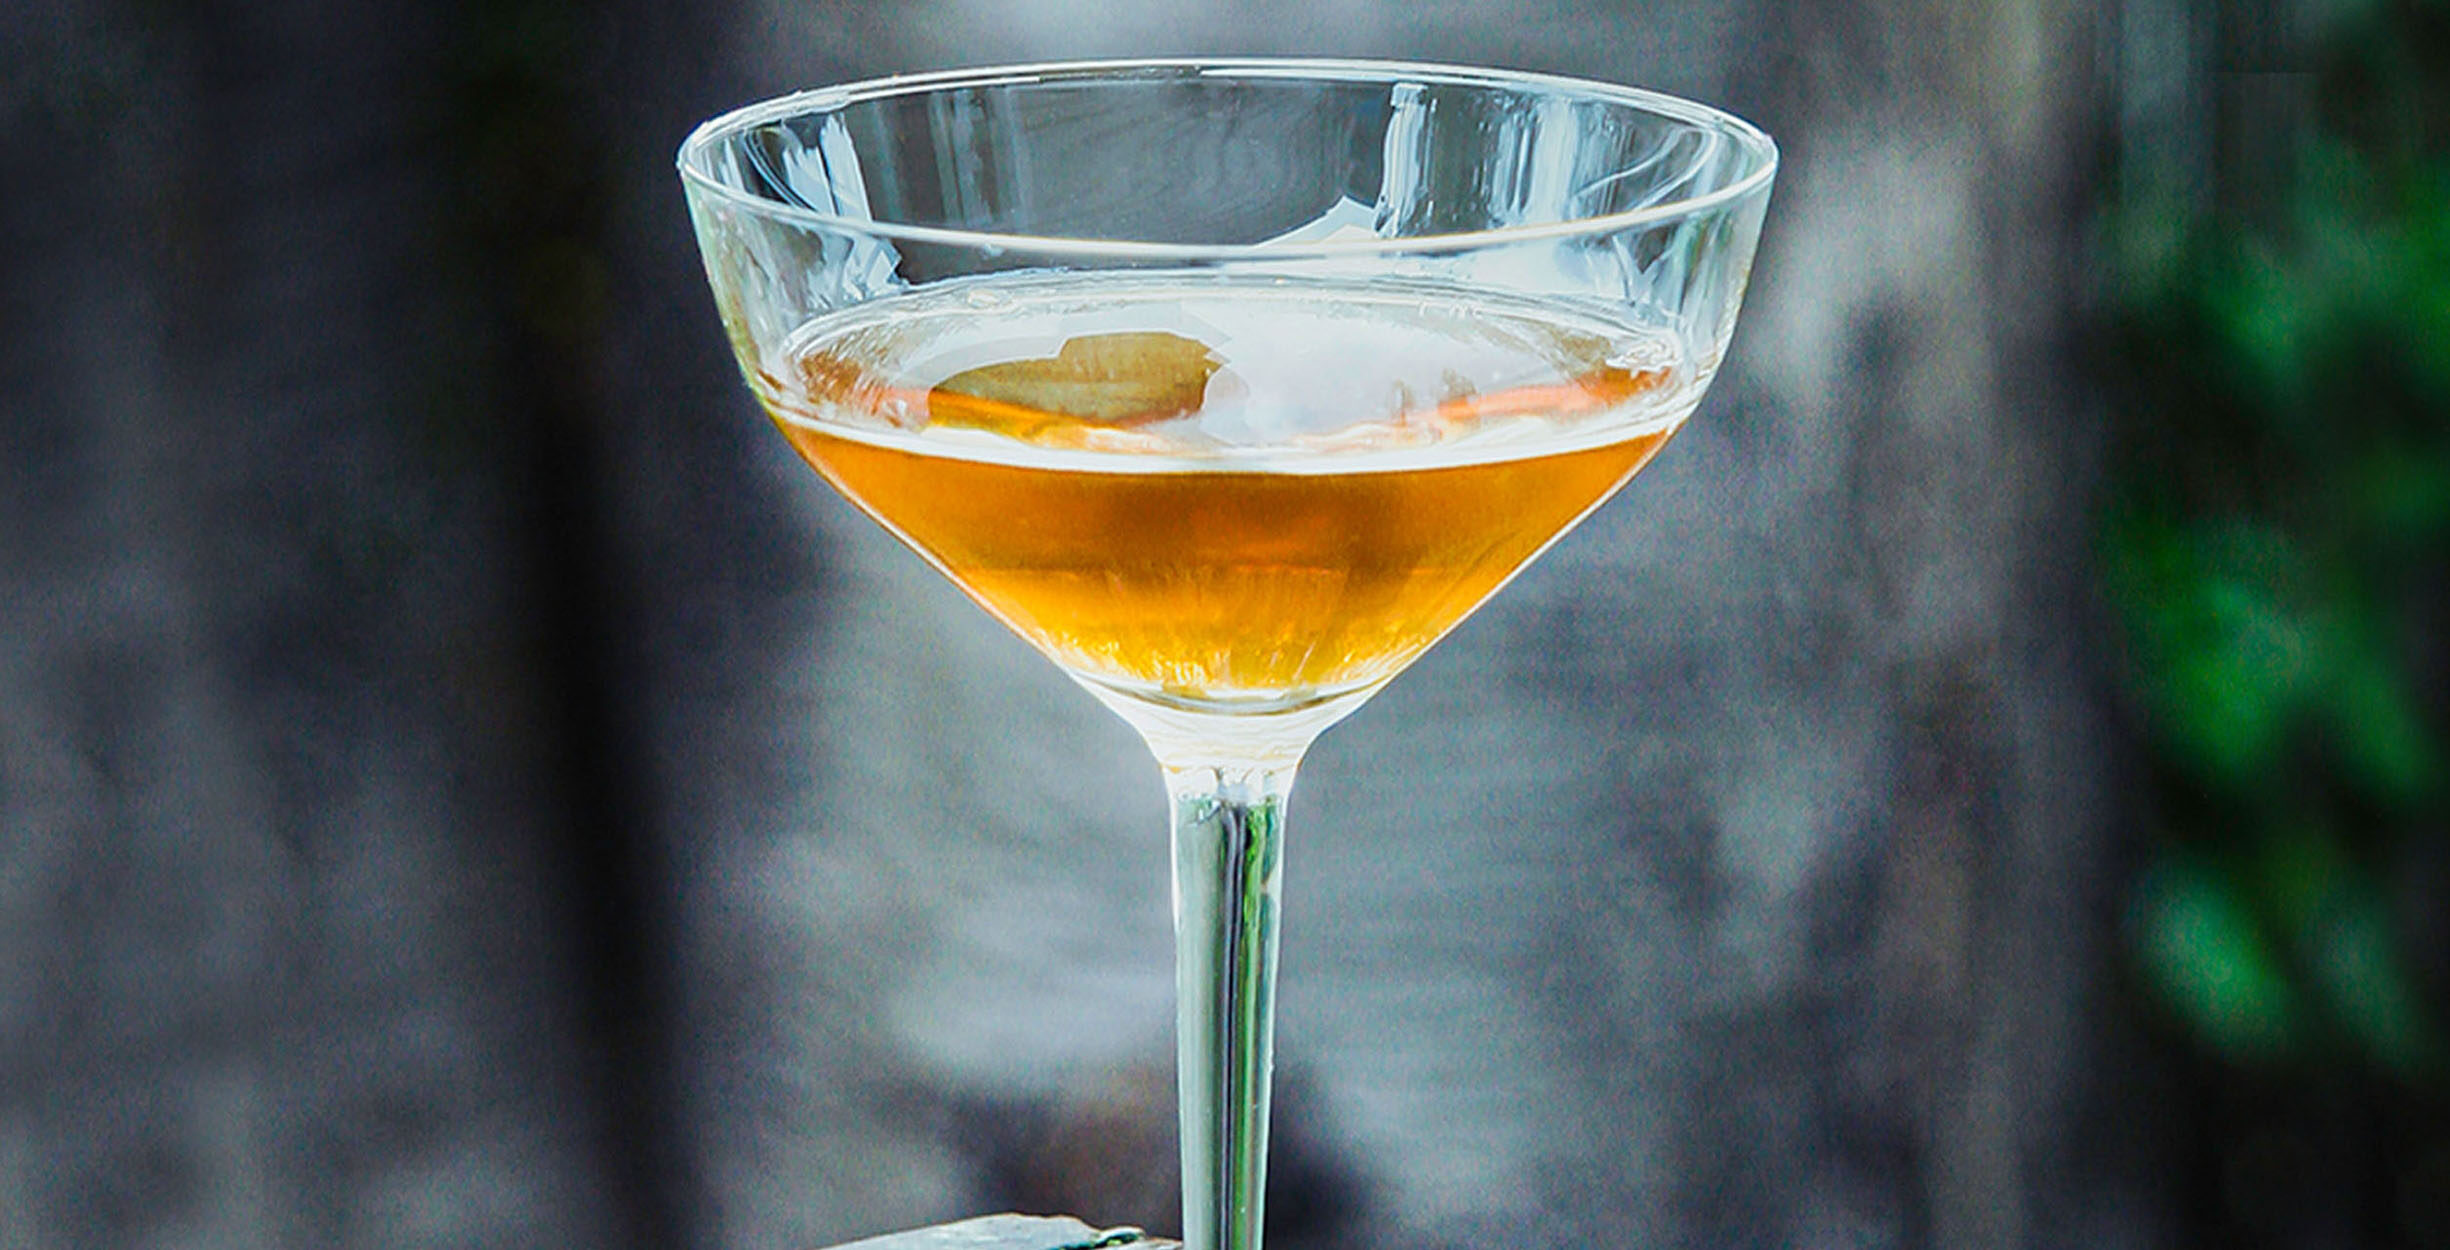 The Adonis Vermouth Cocktail